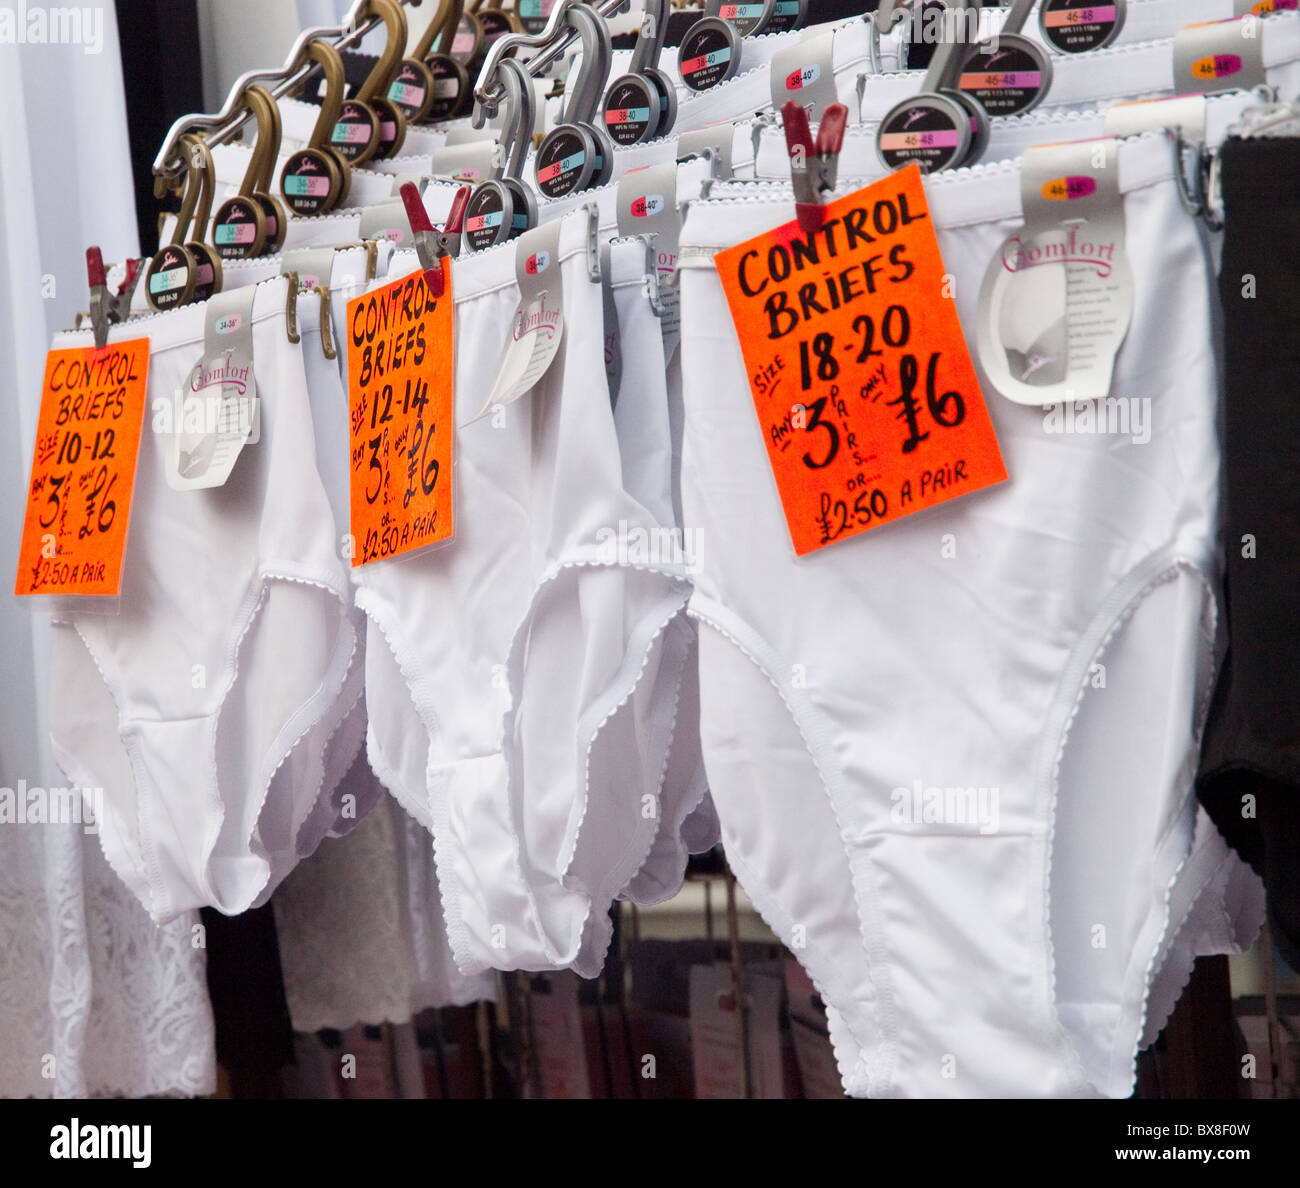 Control briefs for sale at Mansfield Market, Nottinghamshire England UK Stock Photo